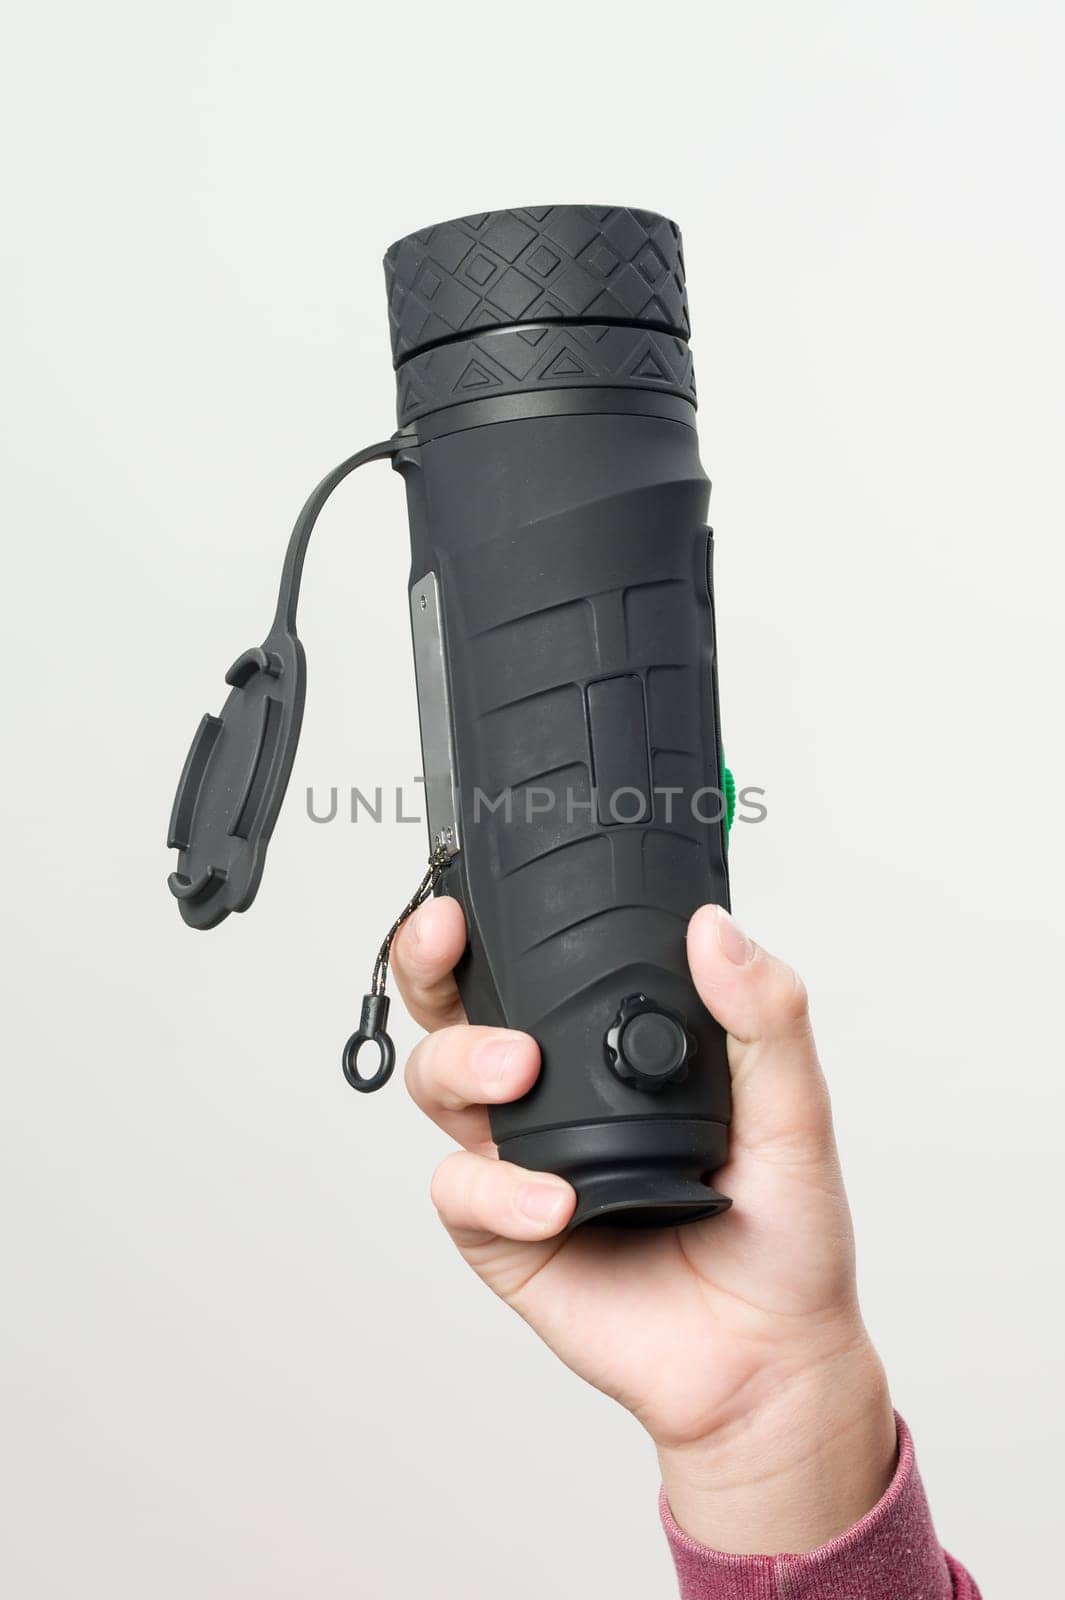 A child holds a monocular in his hand on a white background. by Niko_Cingaryuk